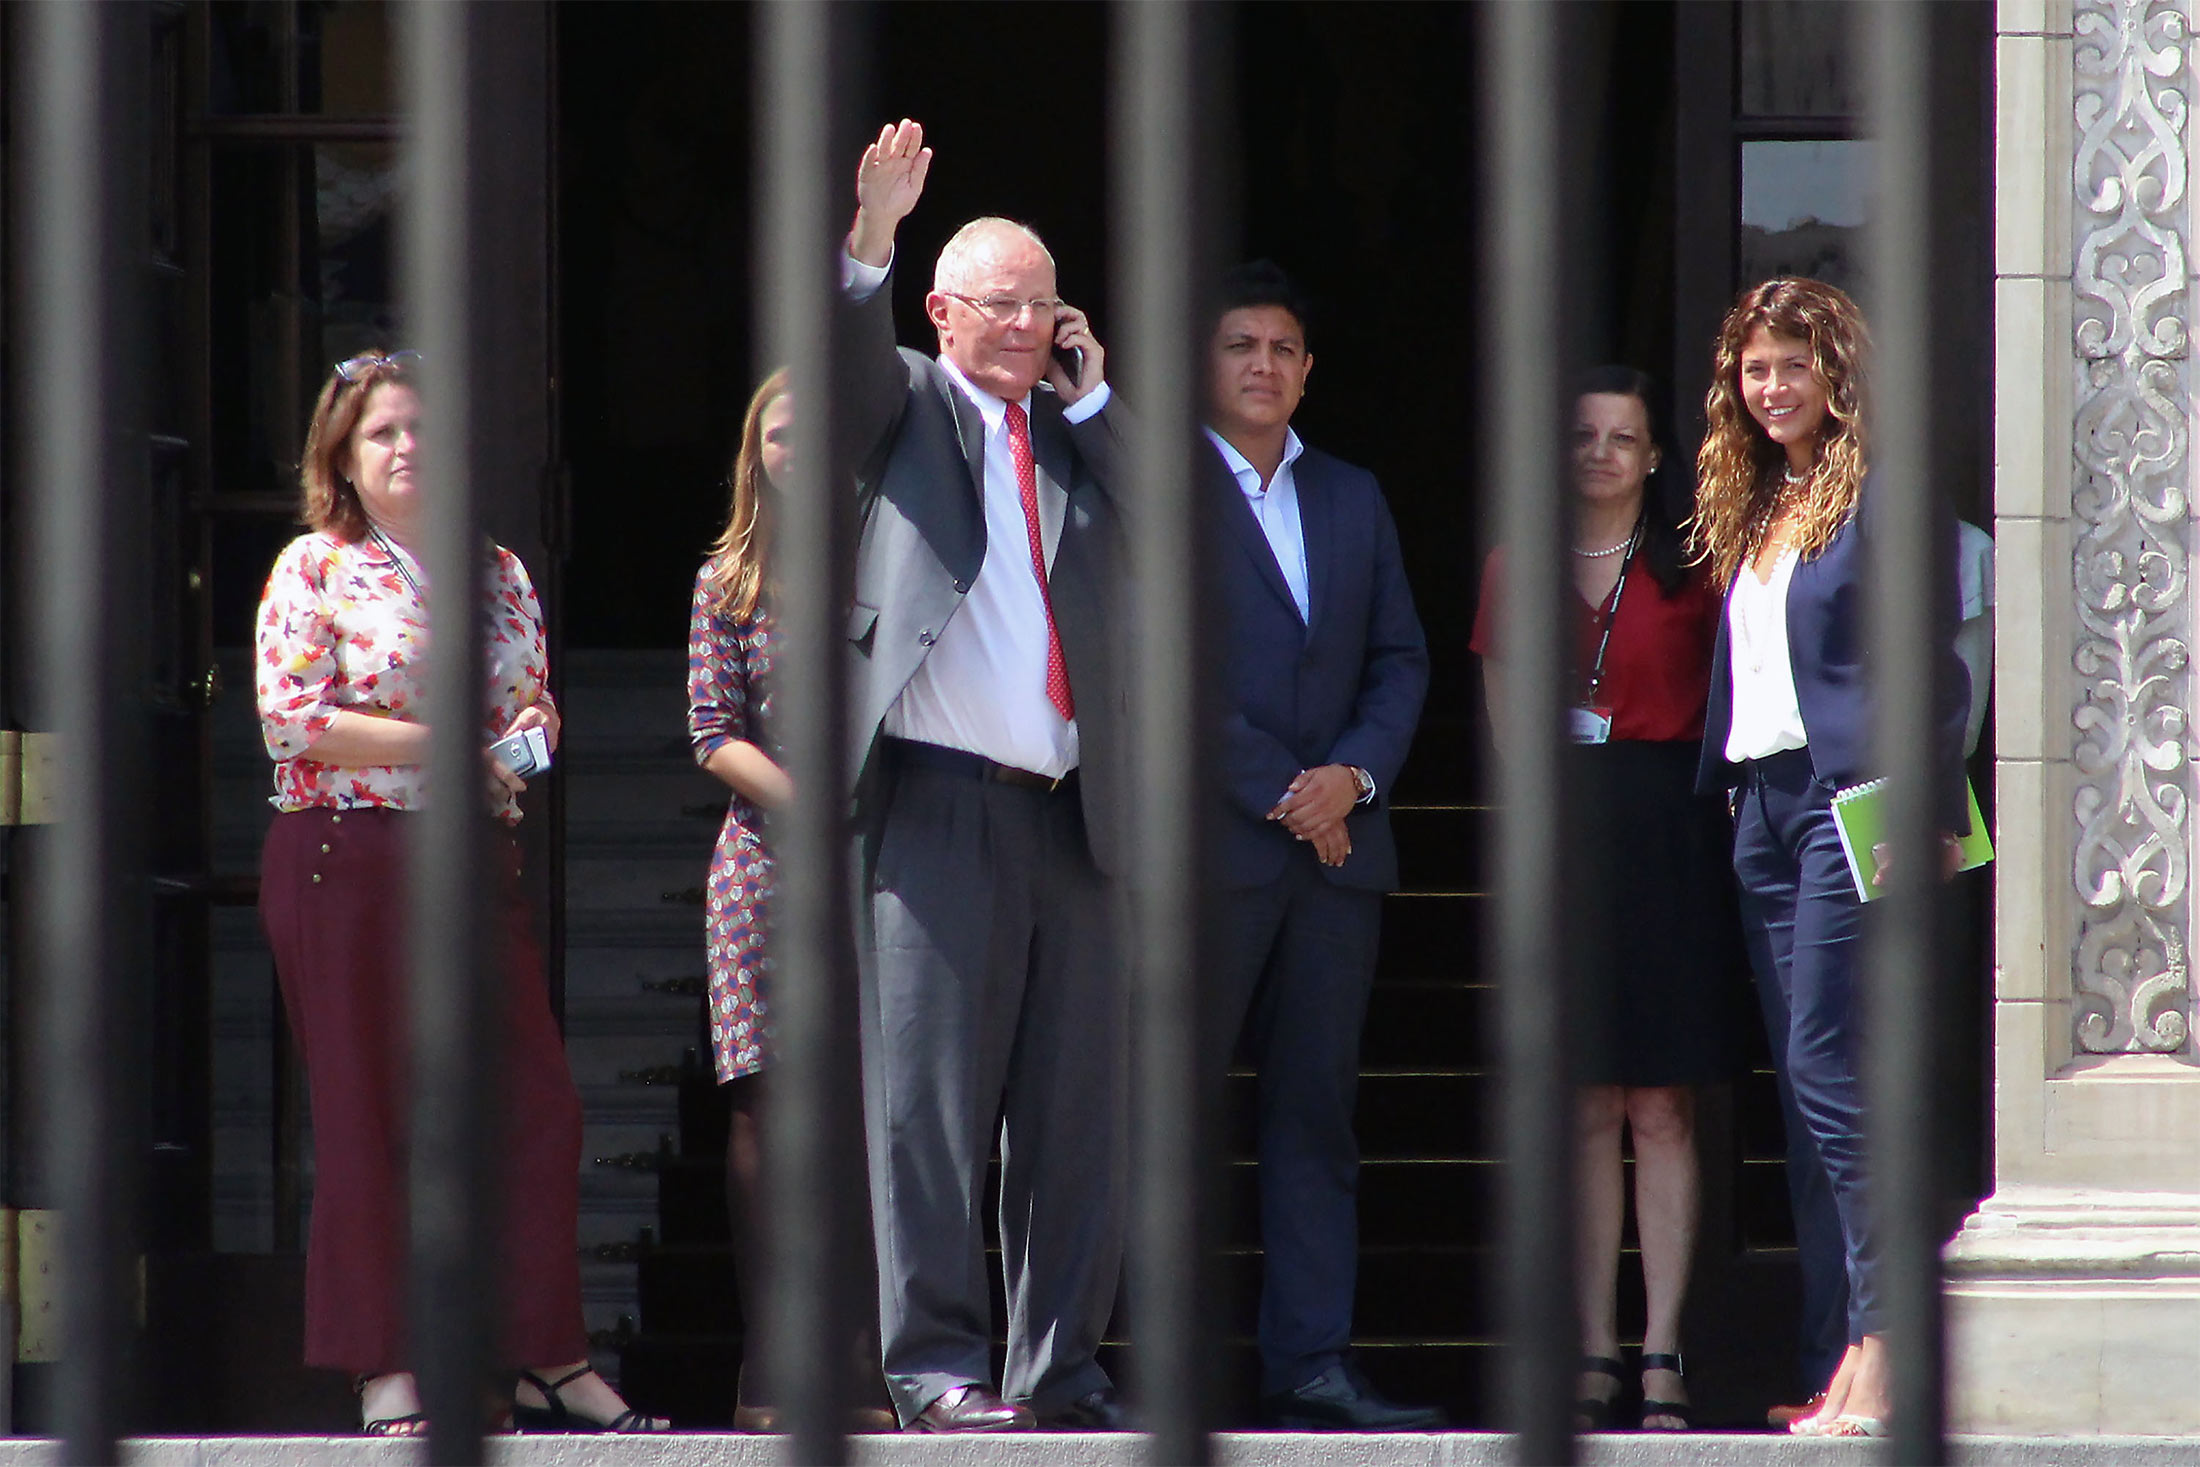 Peruvian former President Pedro Pablo Kuczynski, center,&nbsp;waves before leaving the Palace of Government in Lima, after recording a televised message in which he announced his resignation on March 21, 2018.&nbsp;